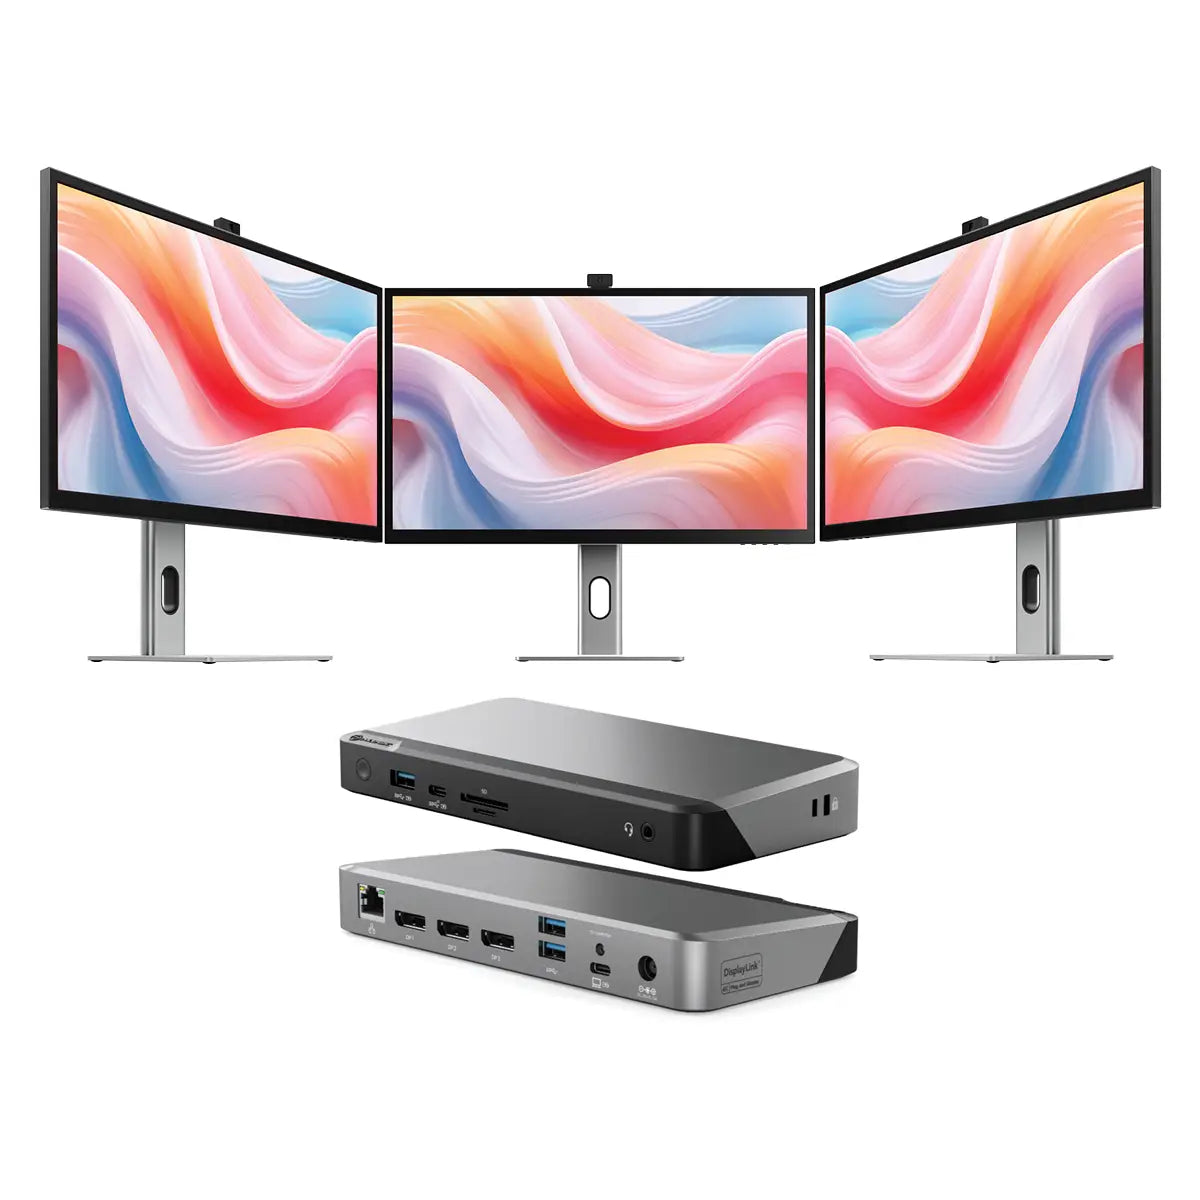 clarity-pro-27-uhd-4k-monitor-with-65w-pd-and-webcam-pack-of-3-dx3-triple-4k-display-universal-docking-station-with-100w-power-delivery1